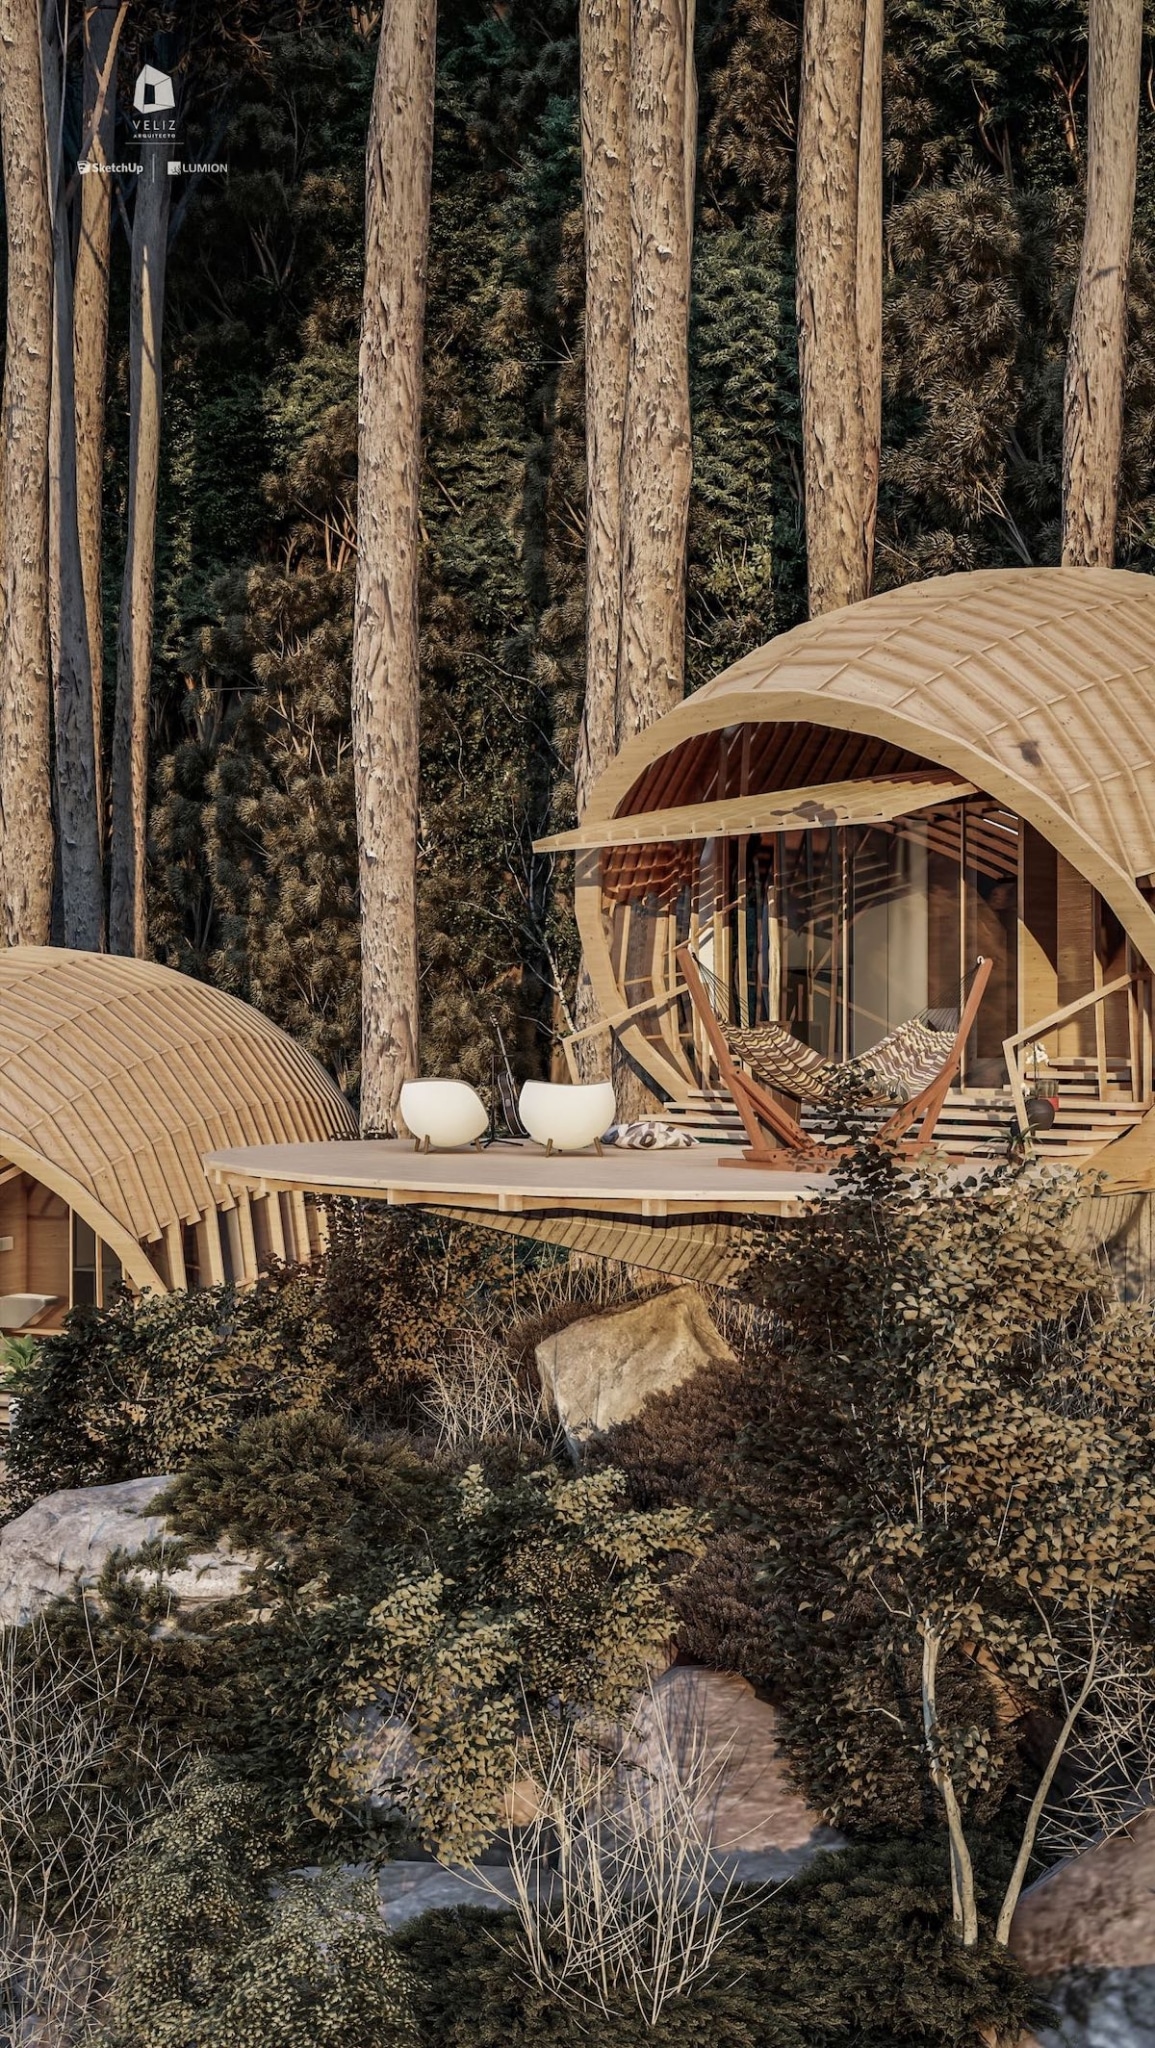 Architects Design Conceptual Cocoon Cabins on this Cuban Mountain Range